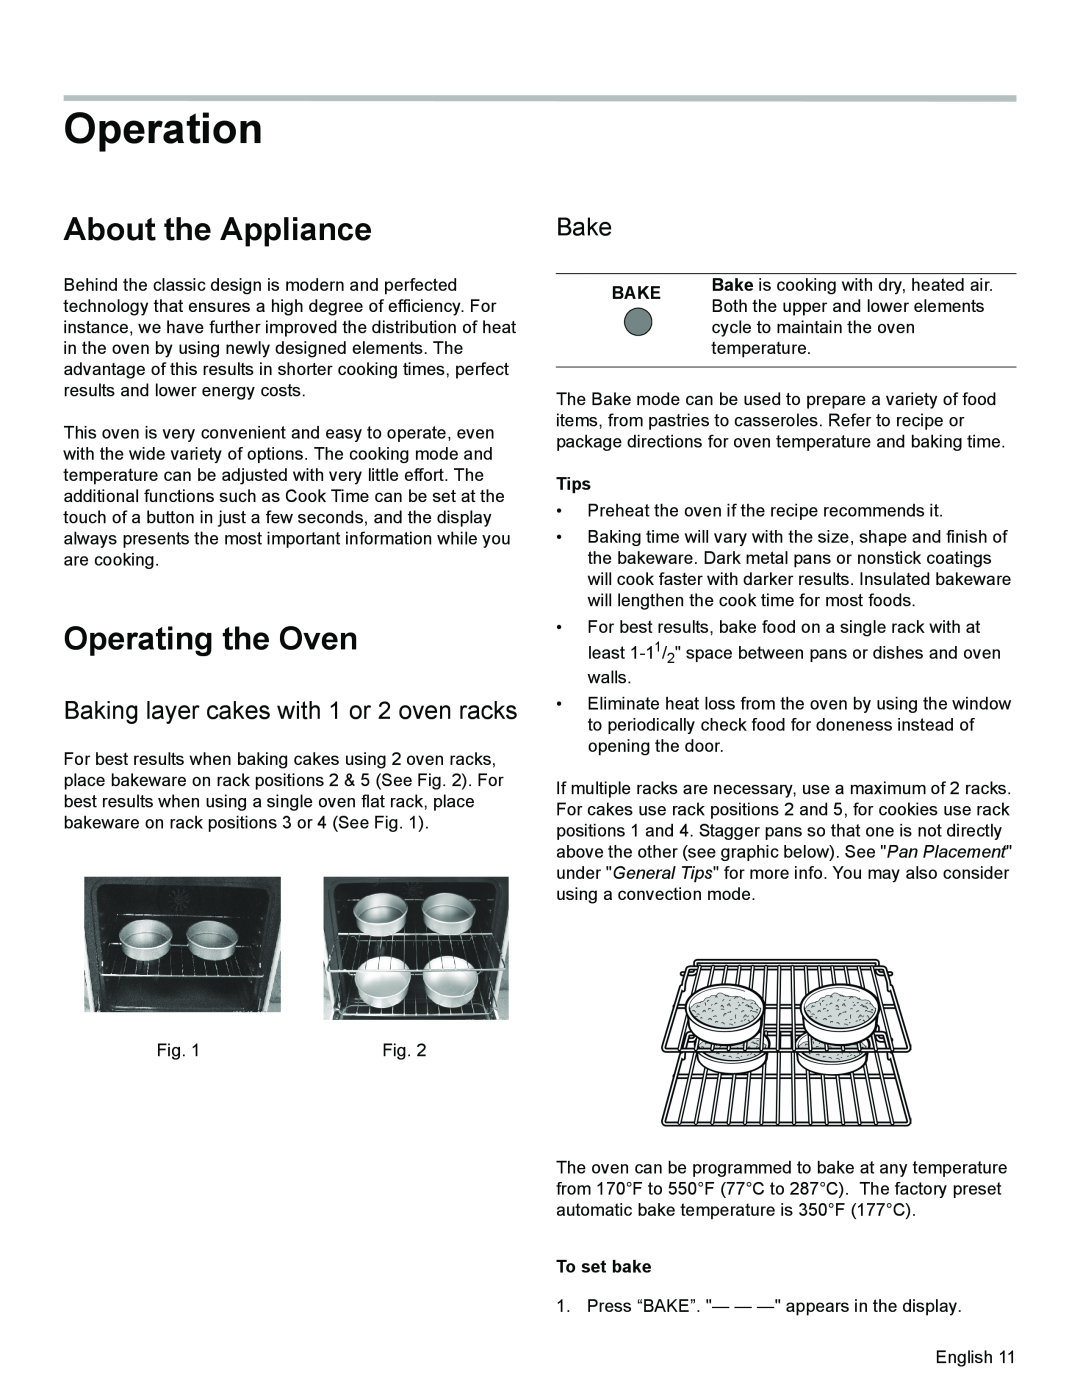 Bosch Appliances HES3063U Operation, About the Appliance, Operating the Oven, Baking layer cakes with 1 or 2 oven racks 